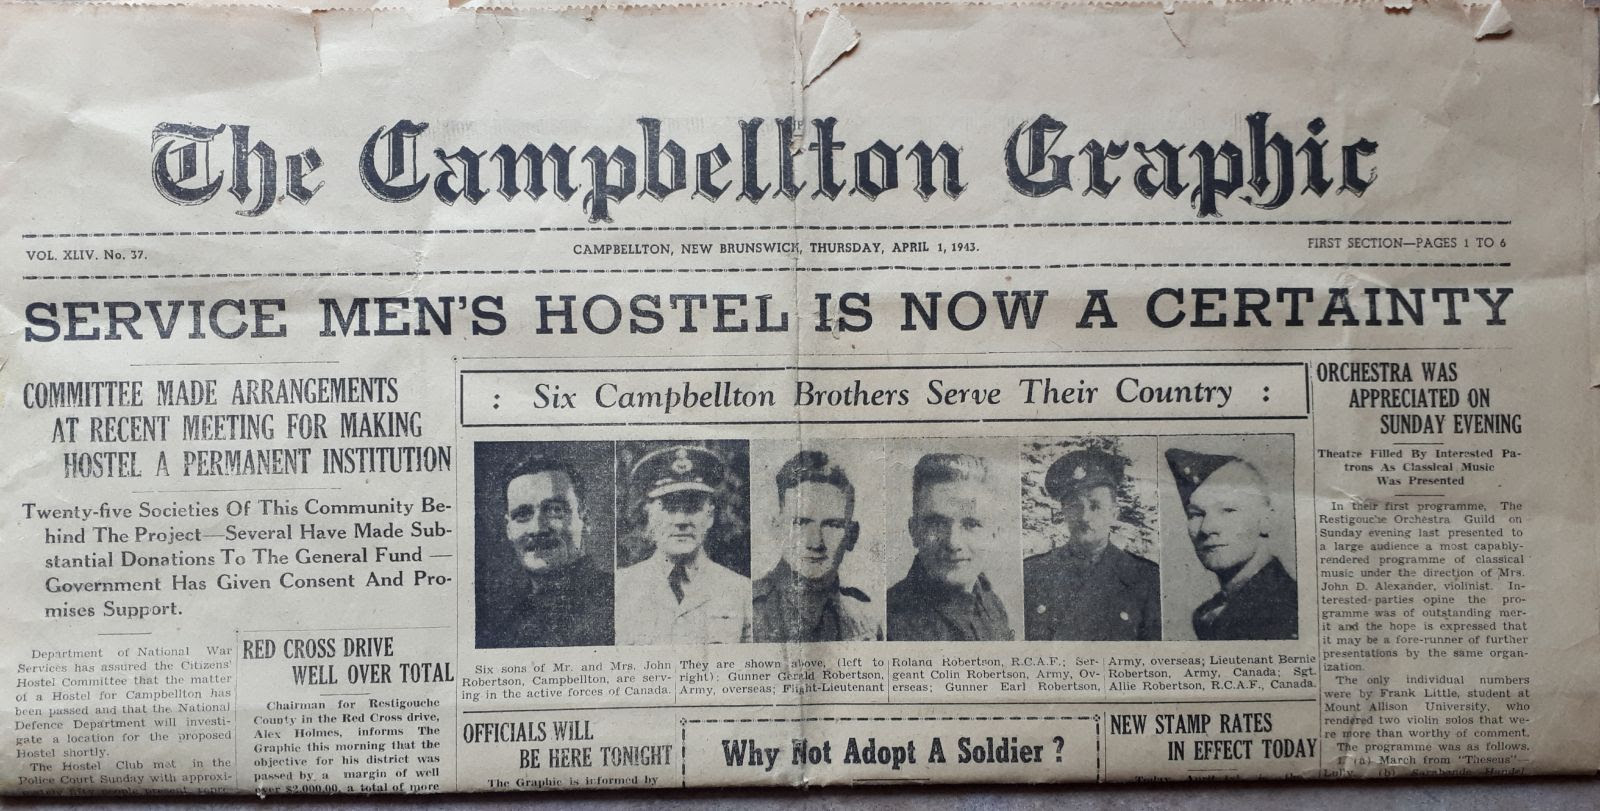 The fighting Robertson brothers of Campbellton, N.B.